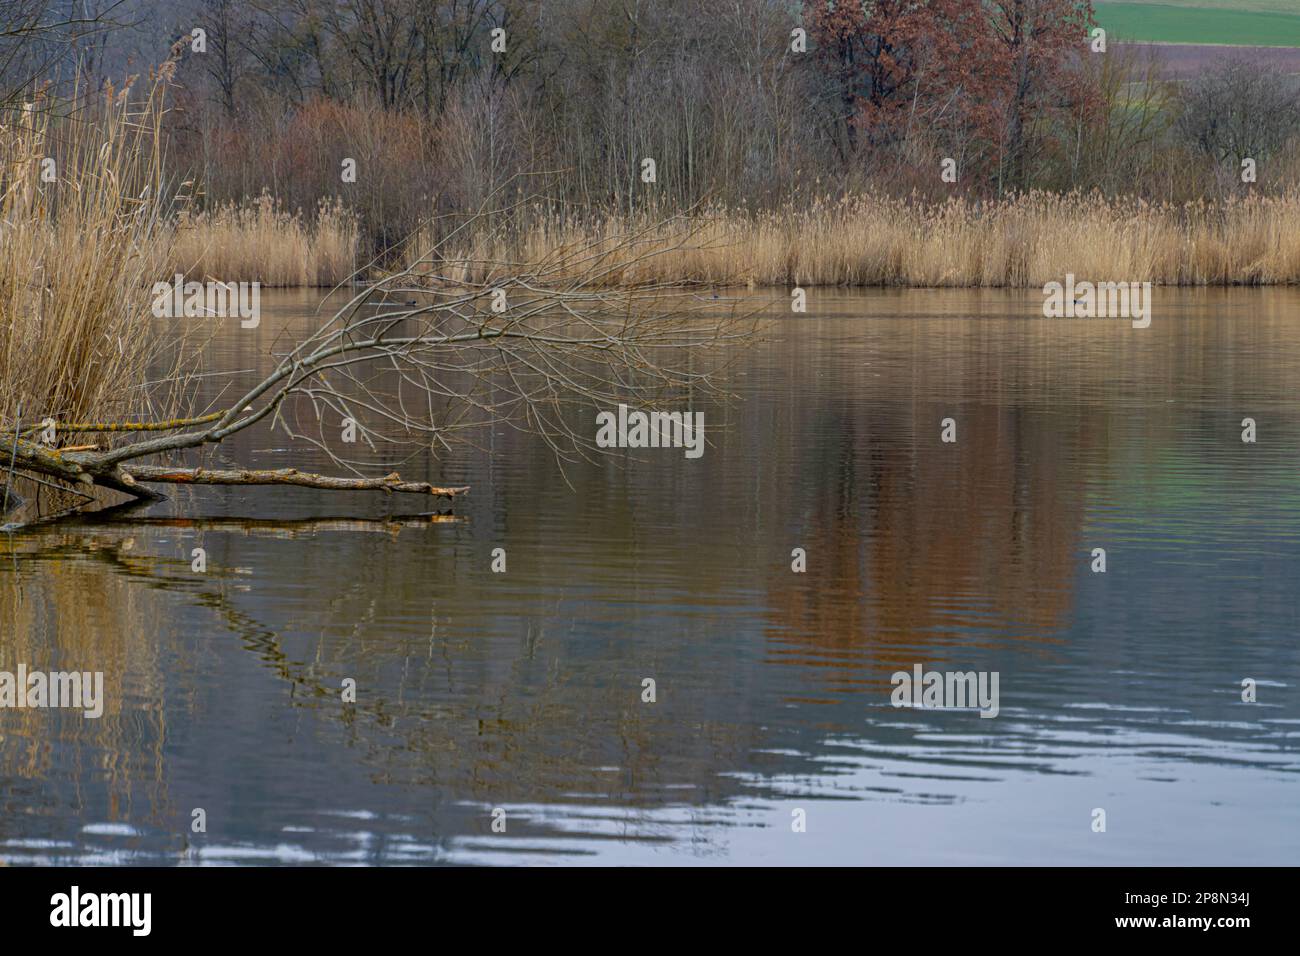 Scenic view of a lakeshore on a cloudy day with focus on branches in foreground Stock Photo